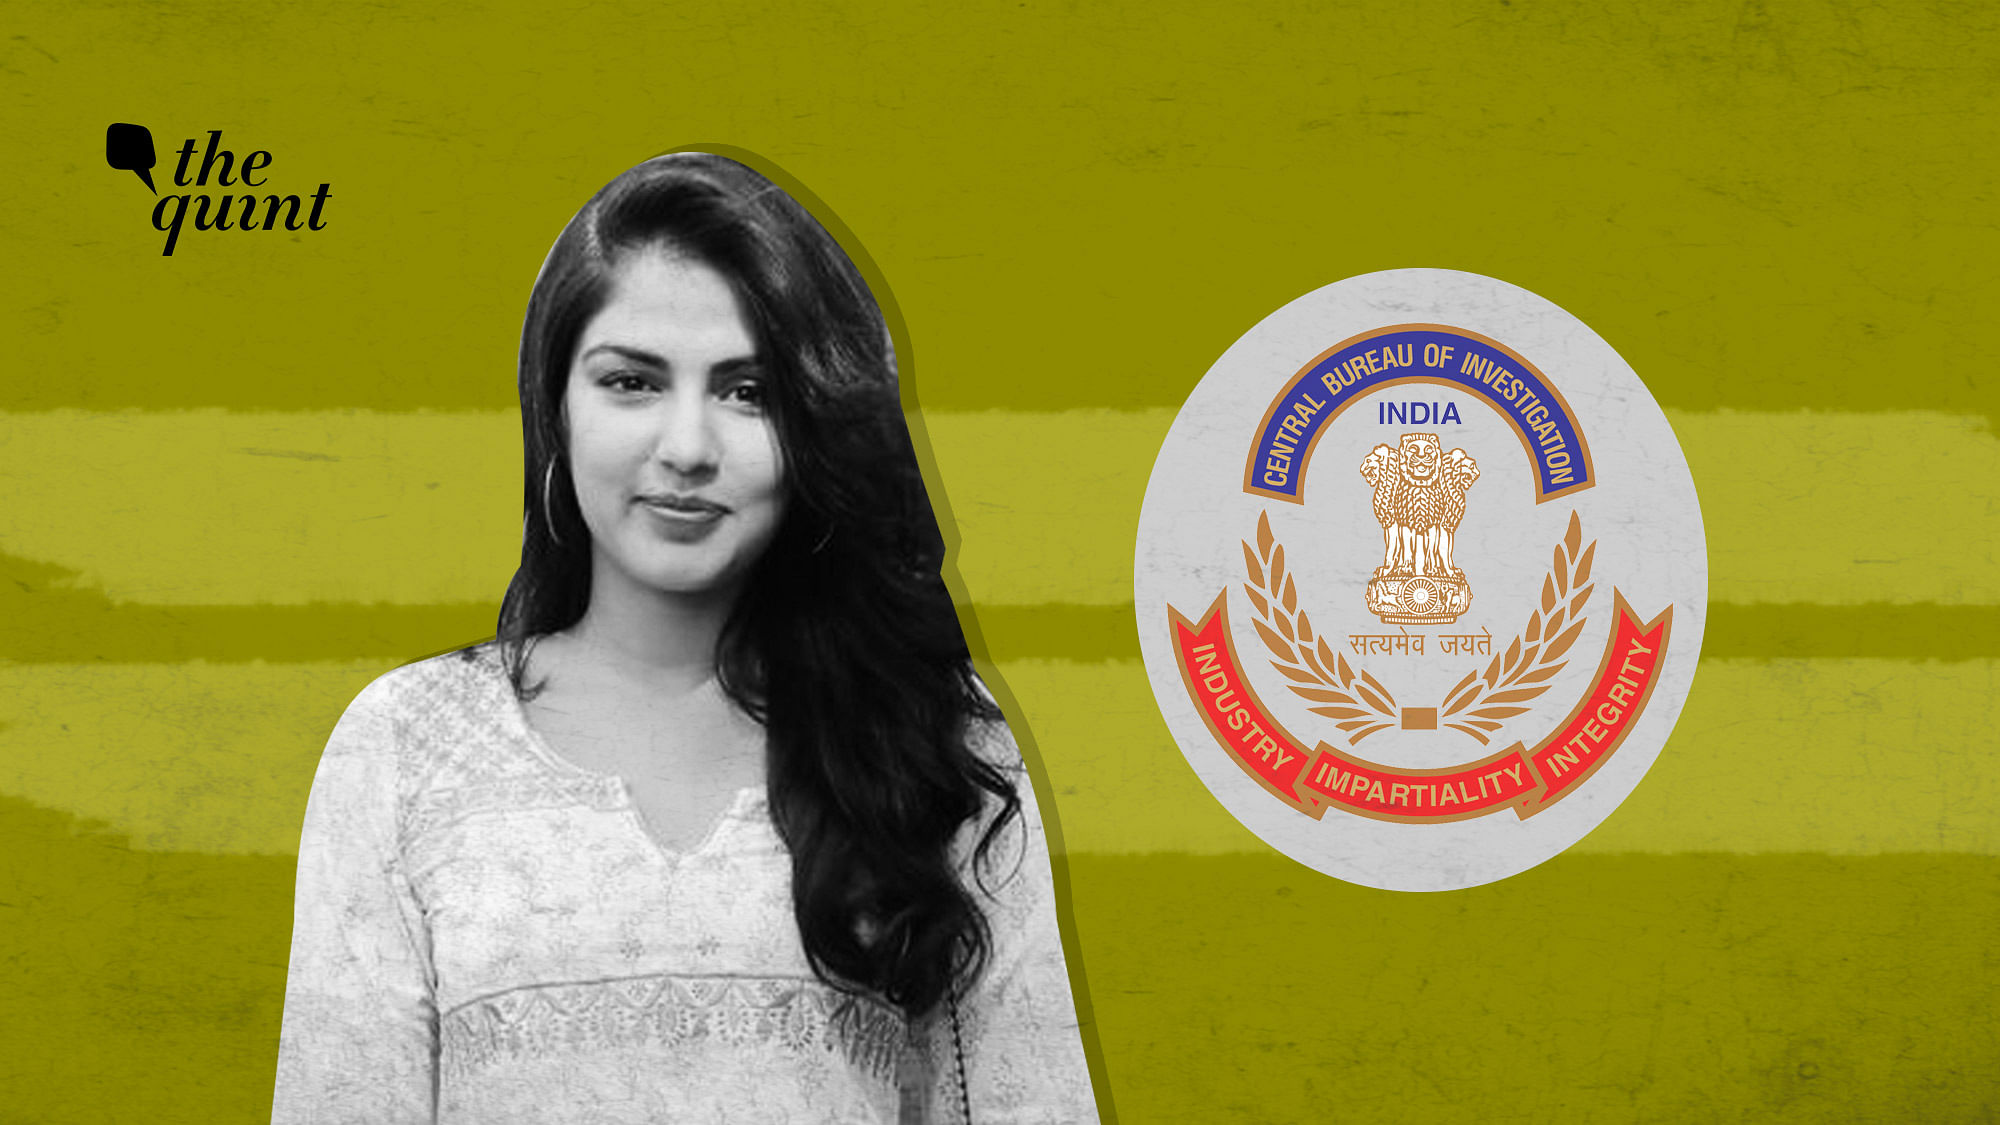 Rhea Chakraborty is being questioned by the CBI